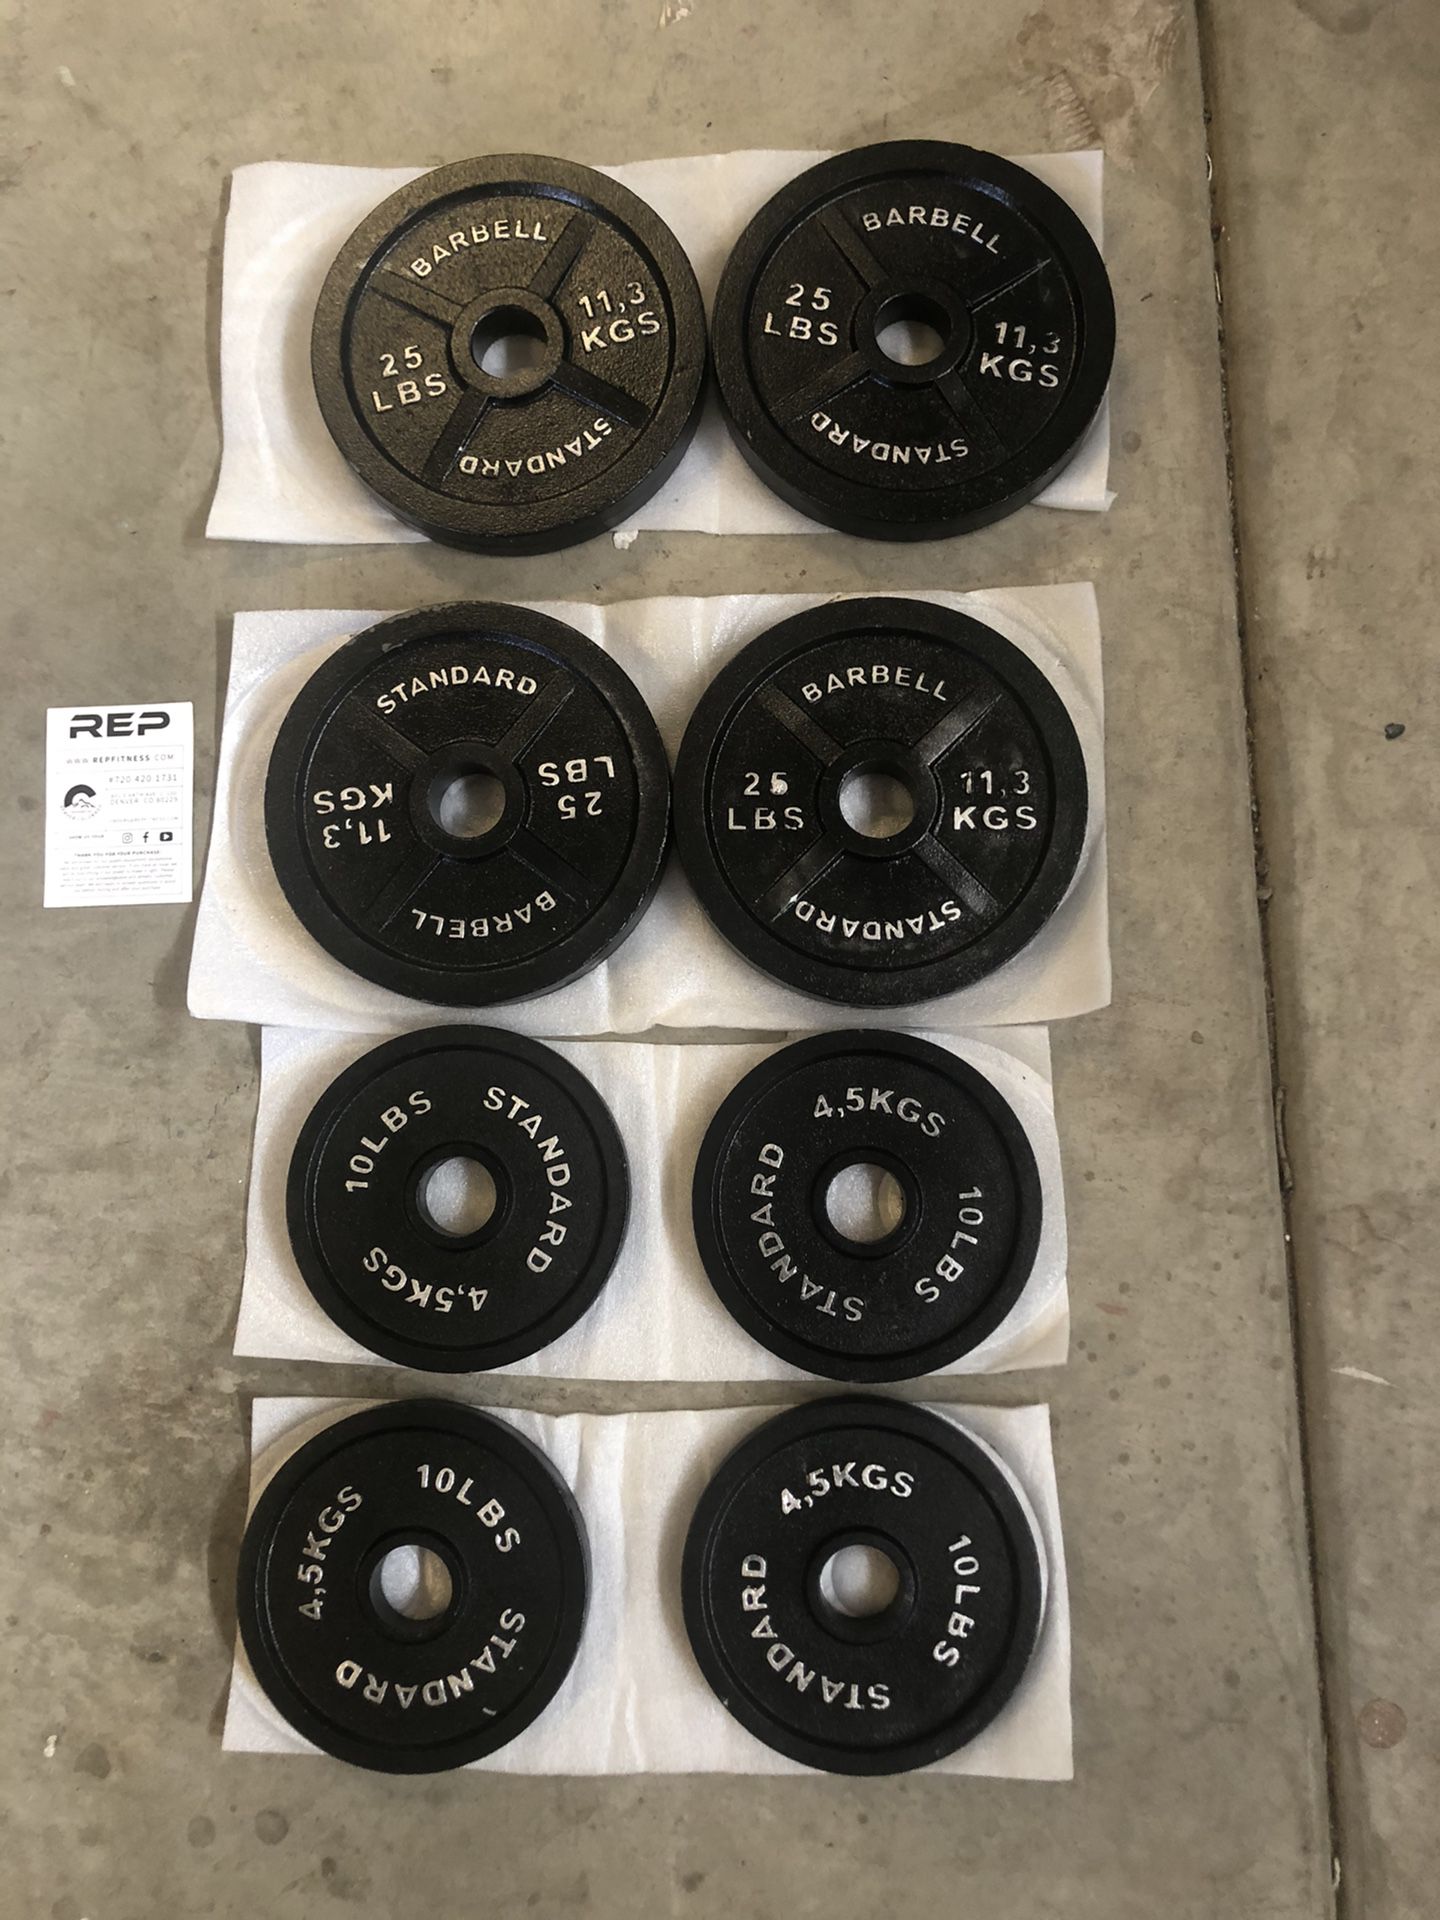 New Rep Fitness Olympic Weights (140lbs)